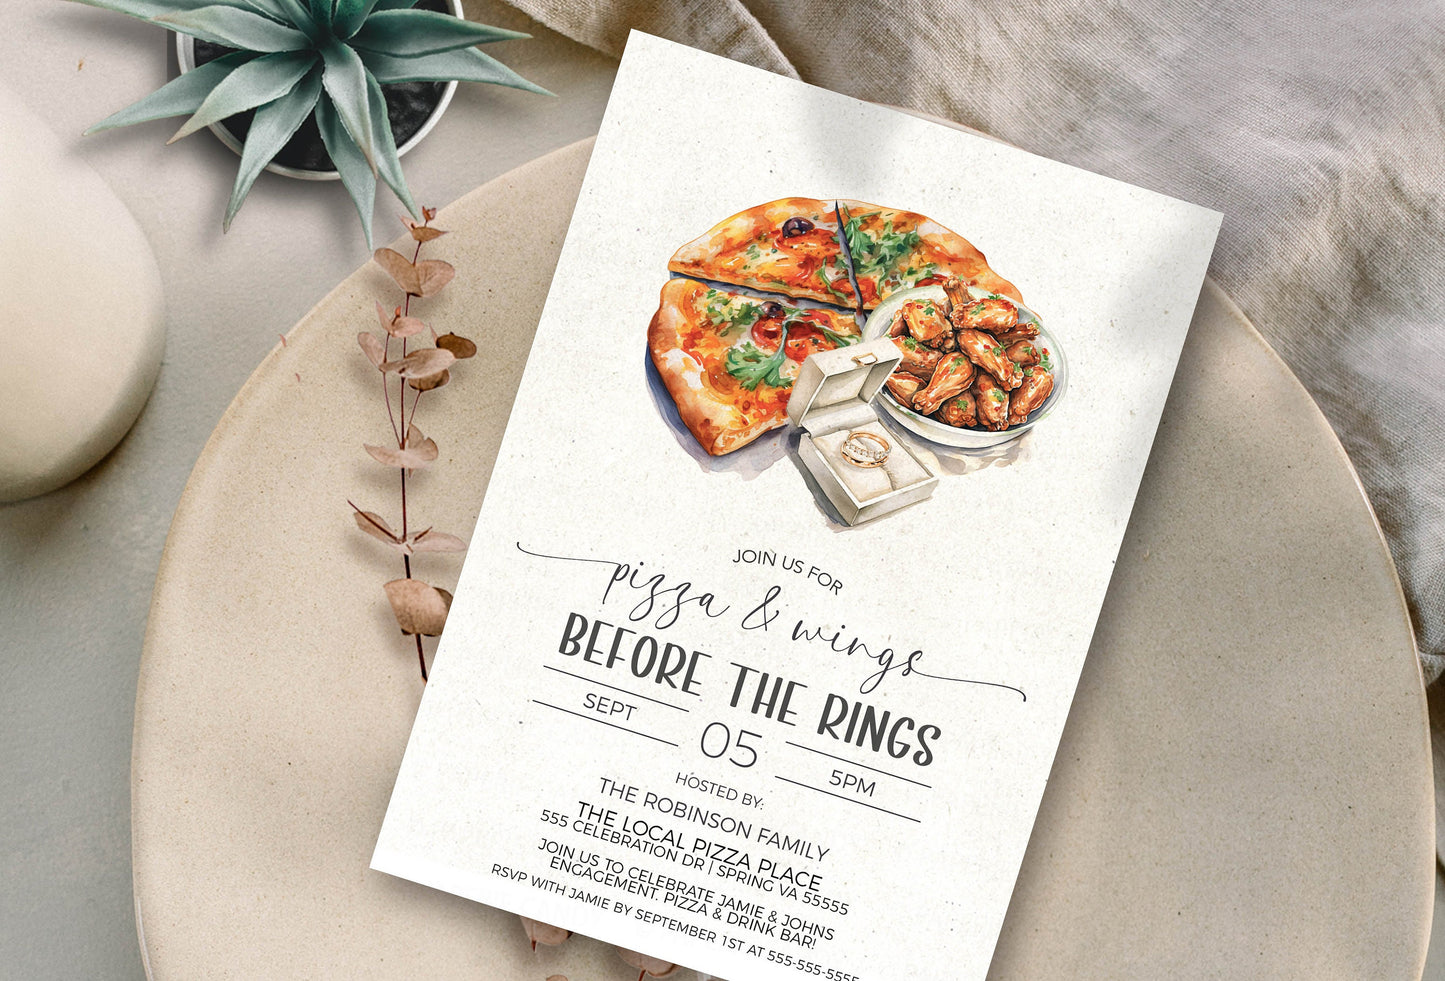 Pizza & Wings Before The Rings Invitation, Pizza Wings Wedding Rehearsal Invite, Couples Shower, Engagement Dinner Party, Editable Printable